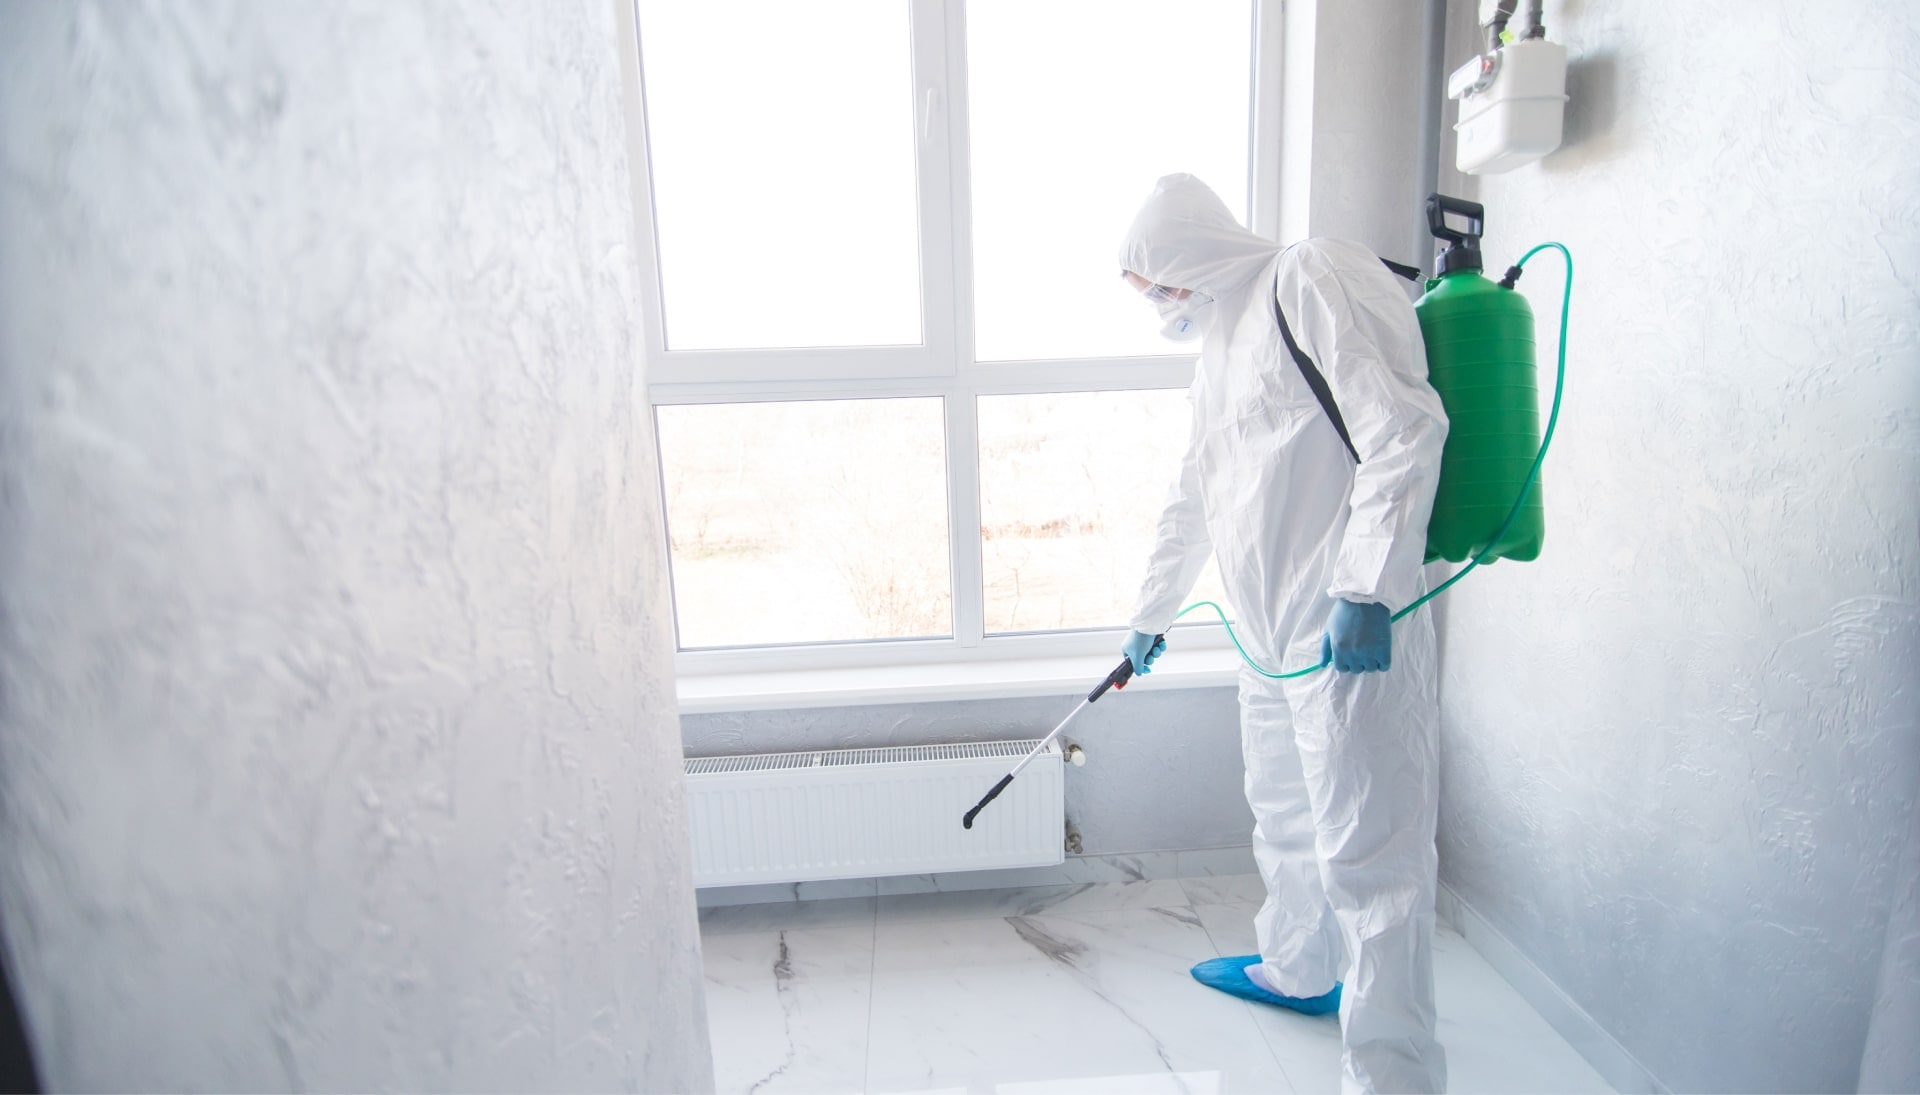 We provide the highest-quality mold inspection, testing, and removal services in the Fort Myers, Florida area.